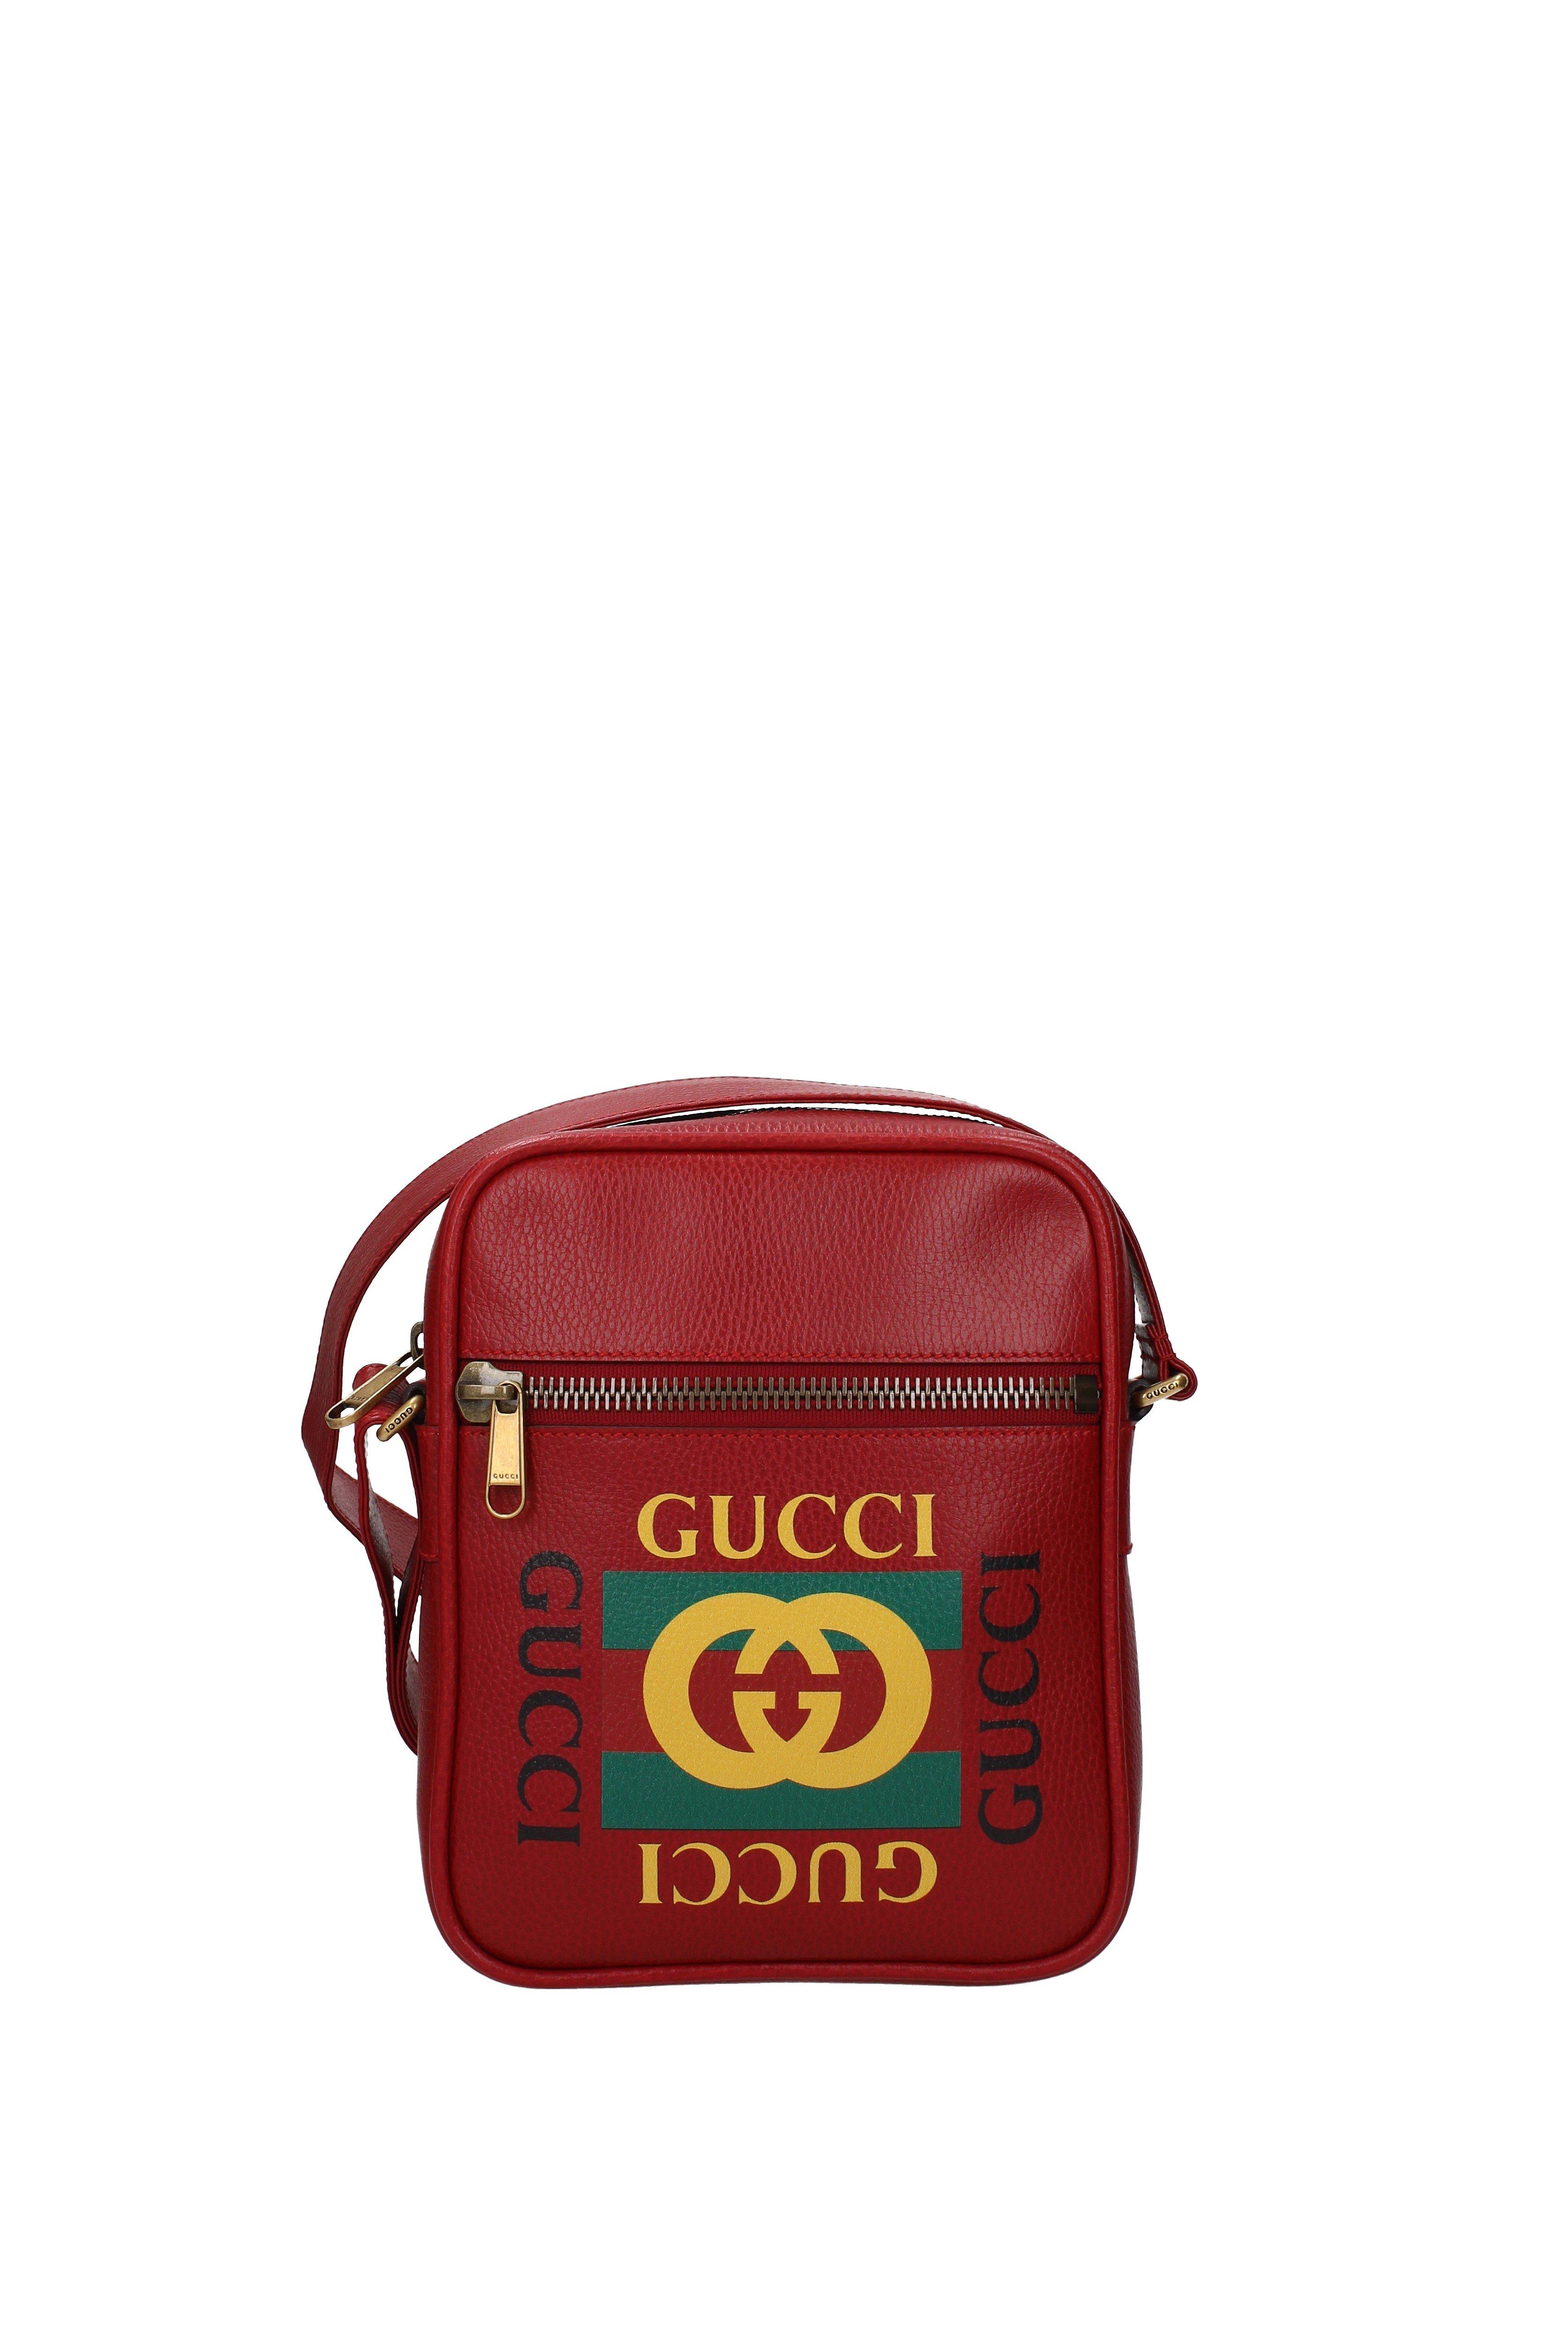 Gucci Crossbody Bag Men Red in Red for Men - Lyst